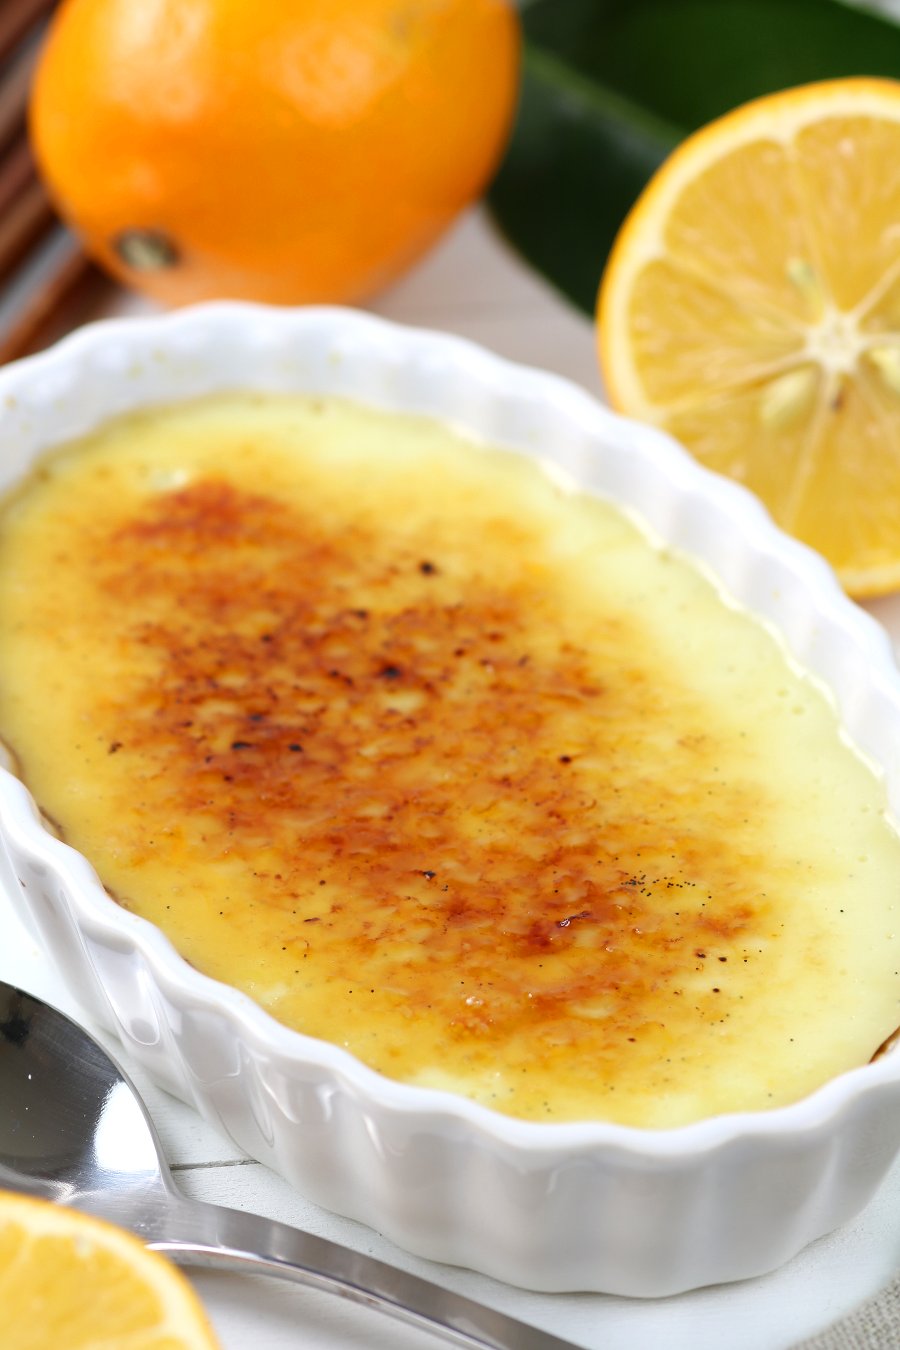 Use your spoon to shatter the caramel crackle topping of this Vegan Meyer Lemon Crème Brûlée and reveal the custardy and lemony dessert underneath!